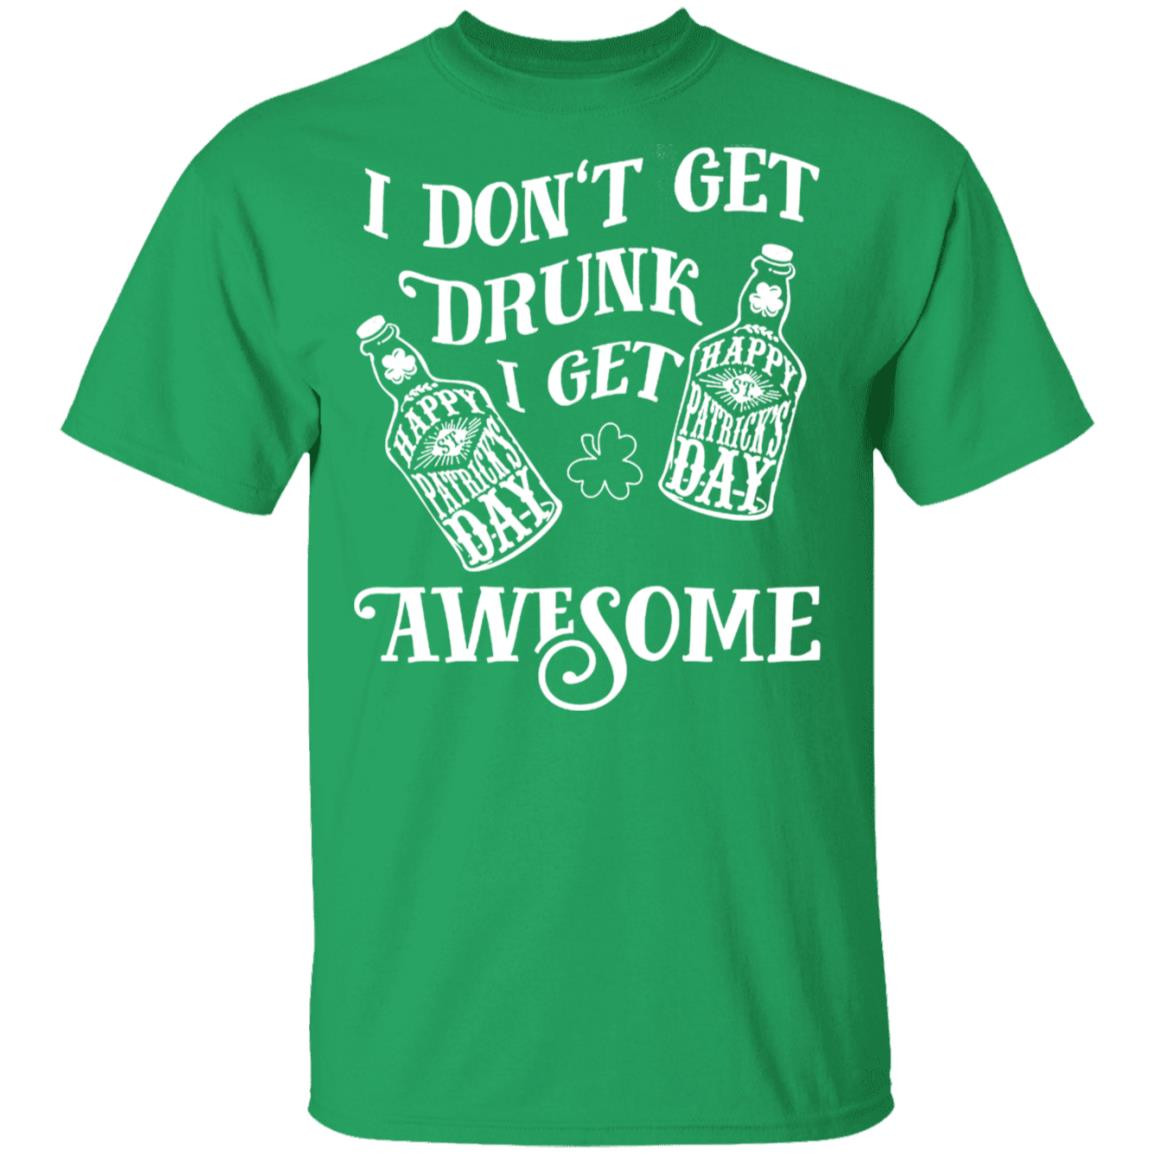 St Patrick's Day Drinking Quotes
 St Patrick s Day Drinking I Don t Get Drunk I Get Awesome